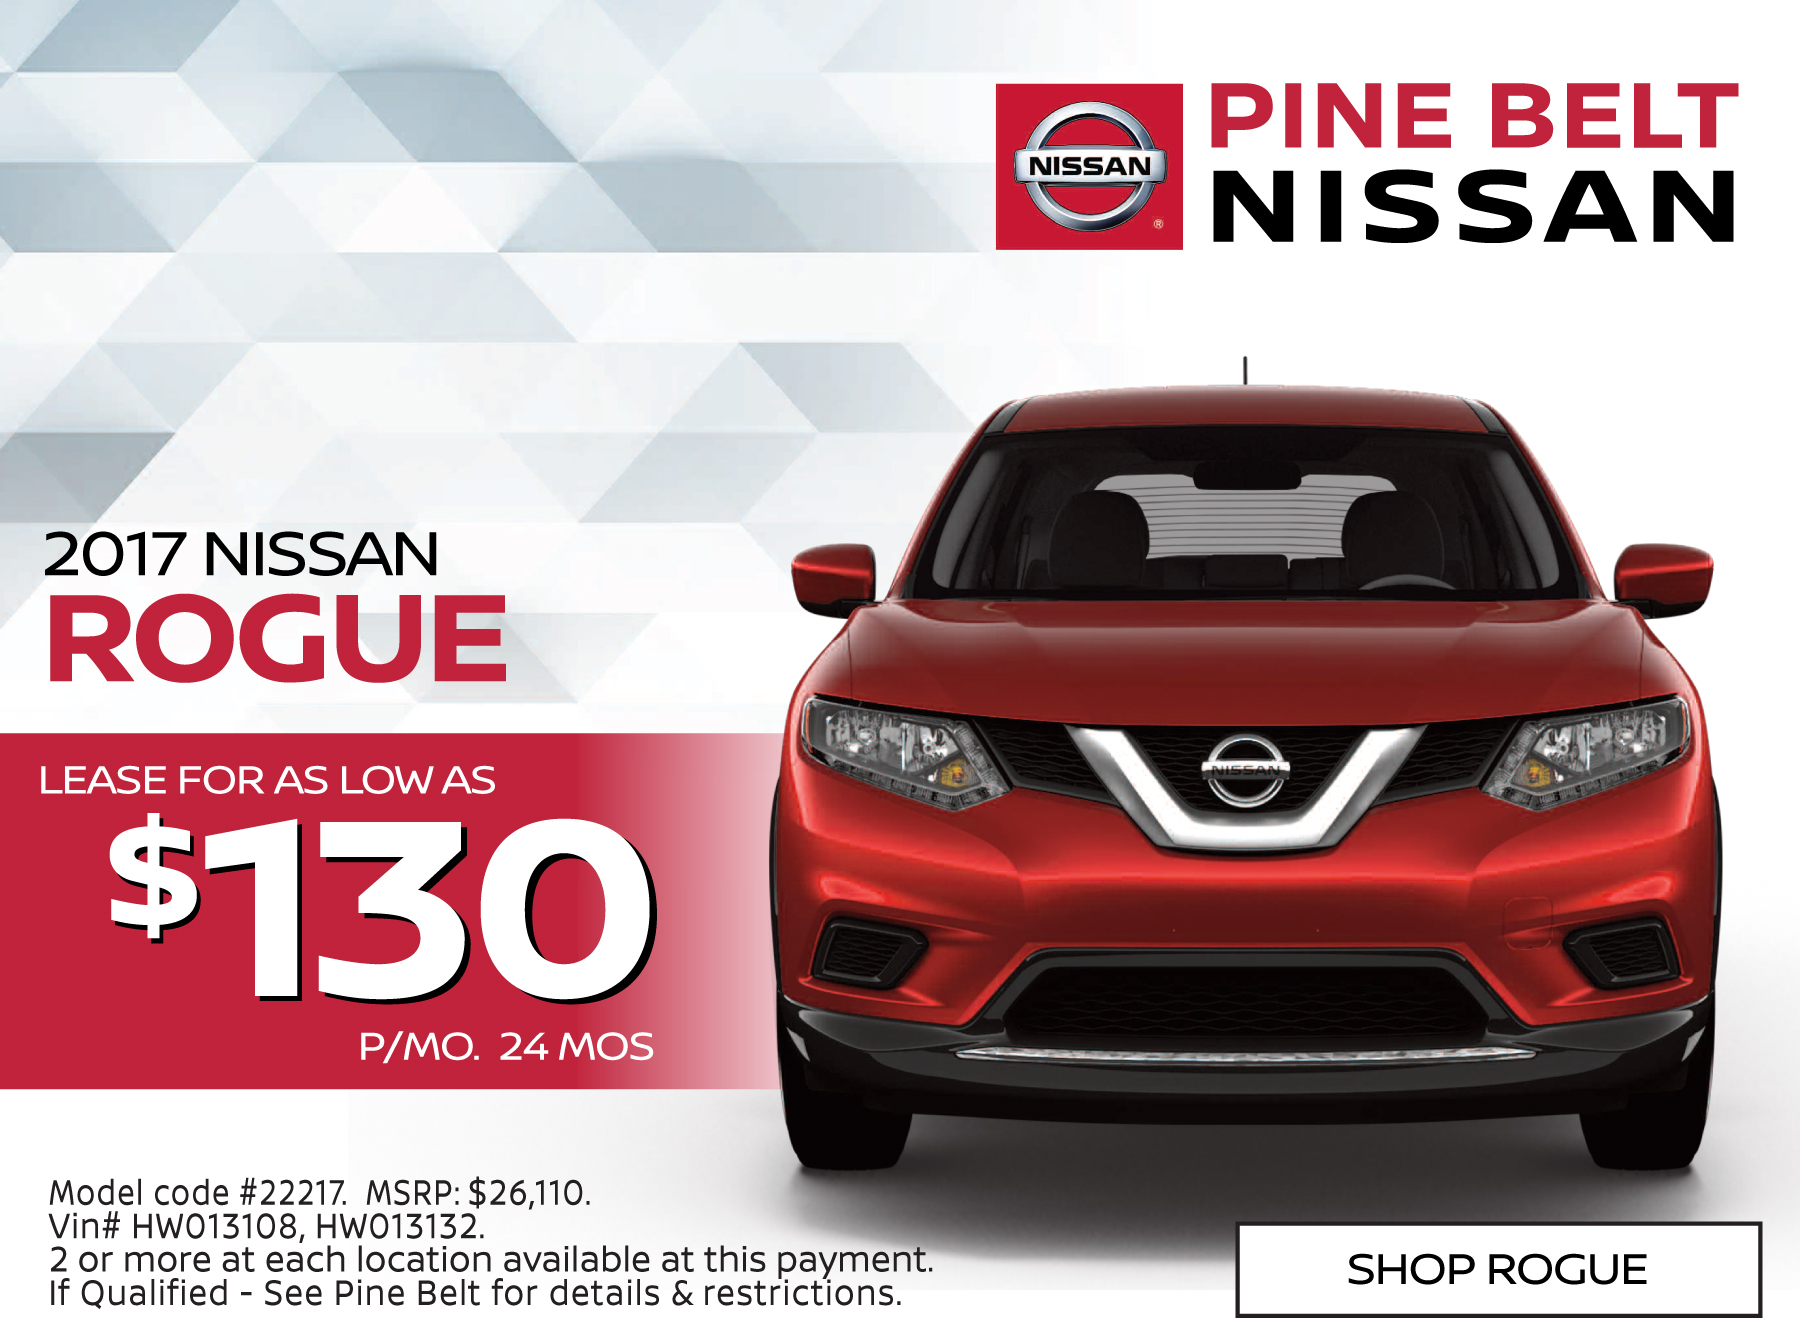 New Nissan Lease Specials